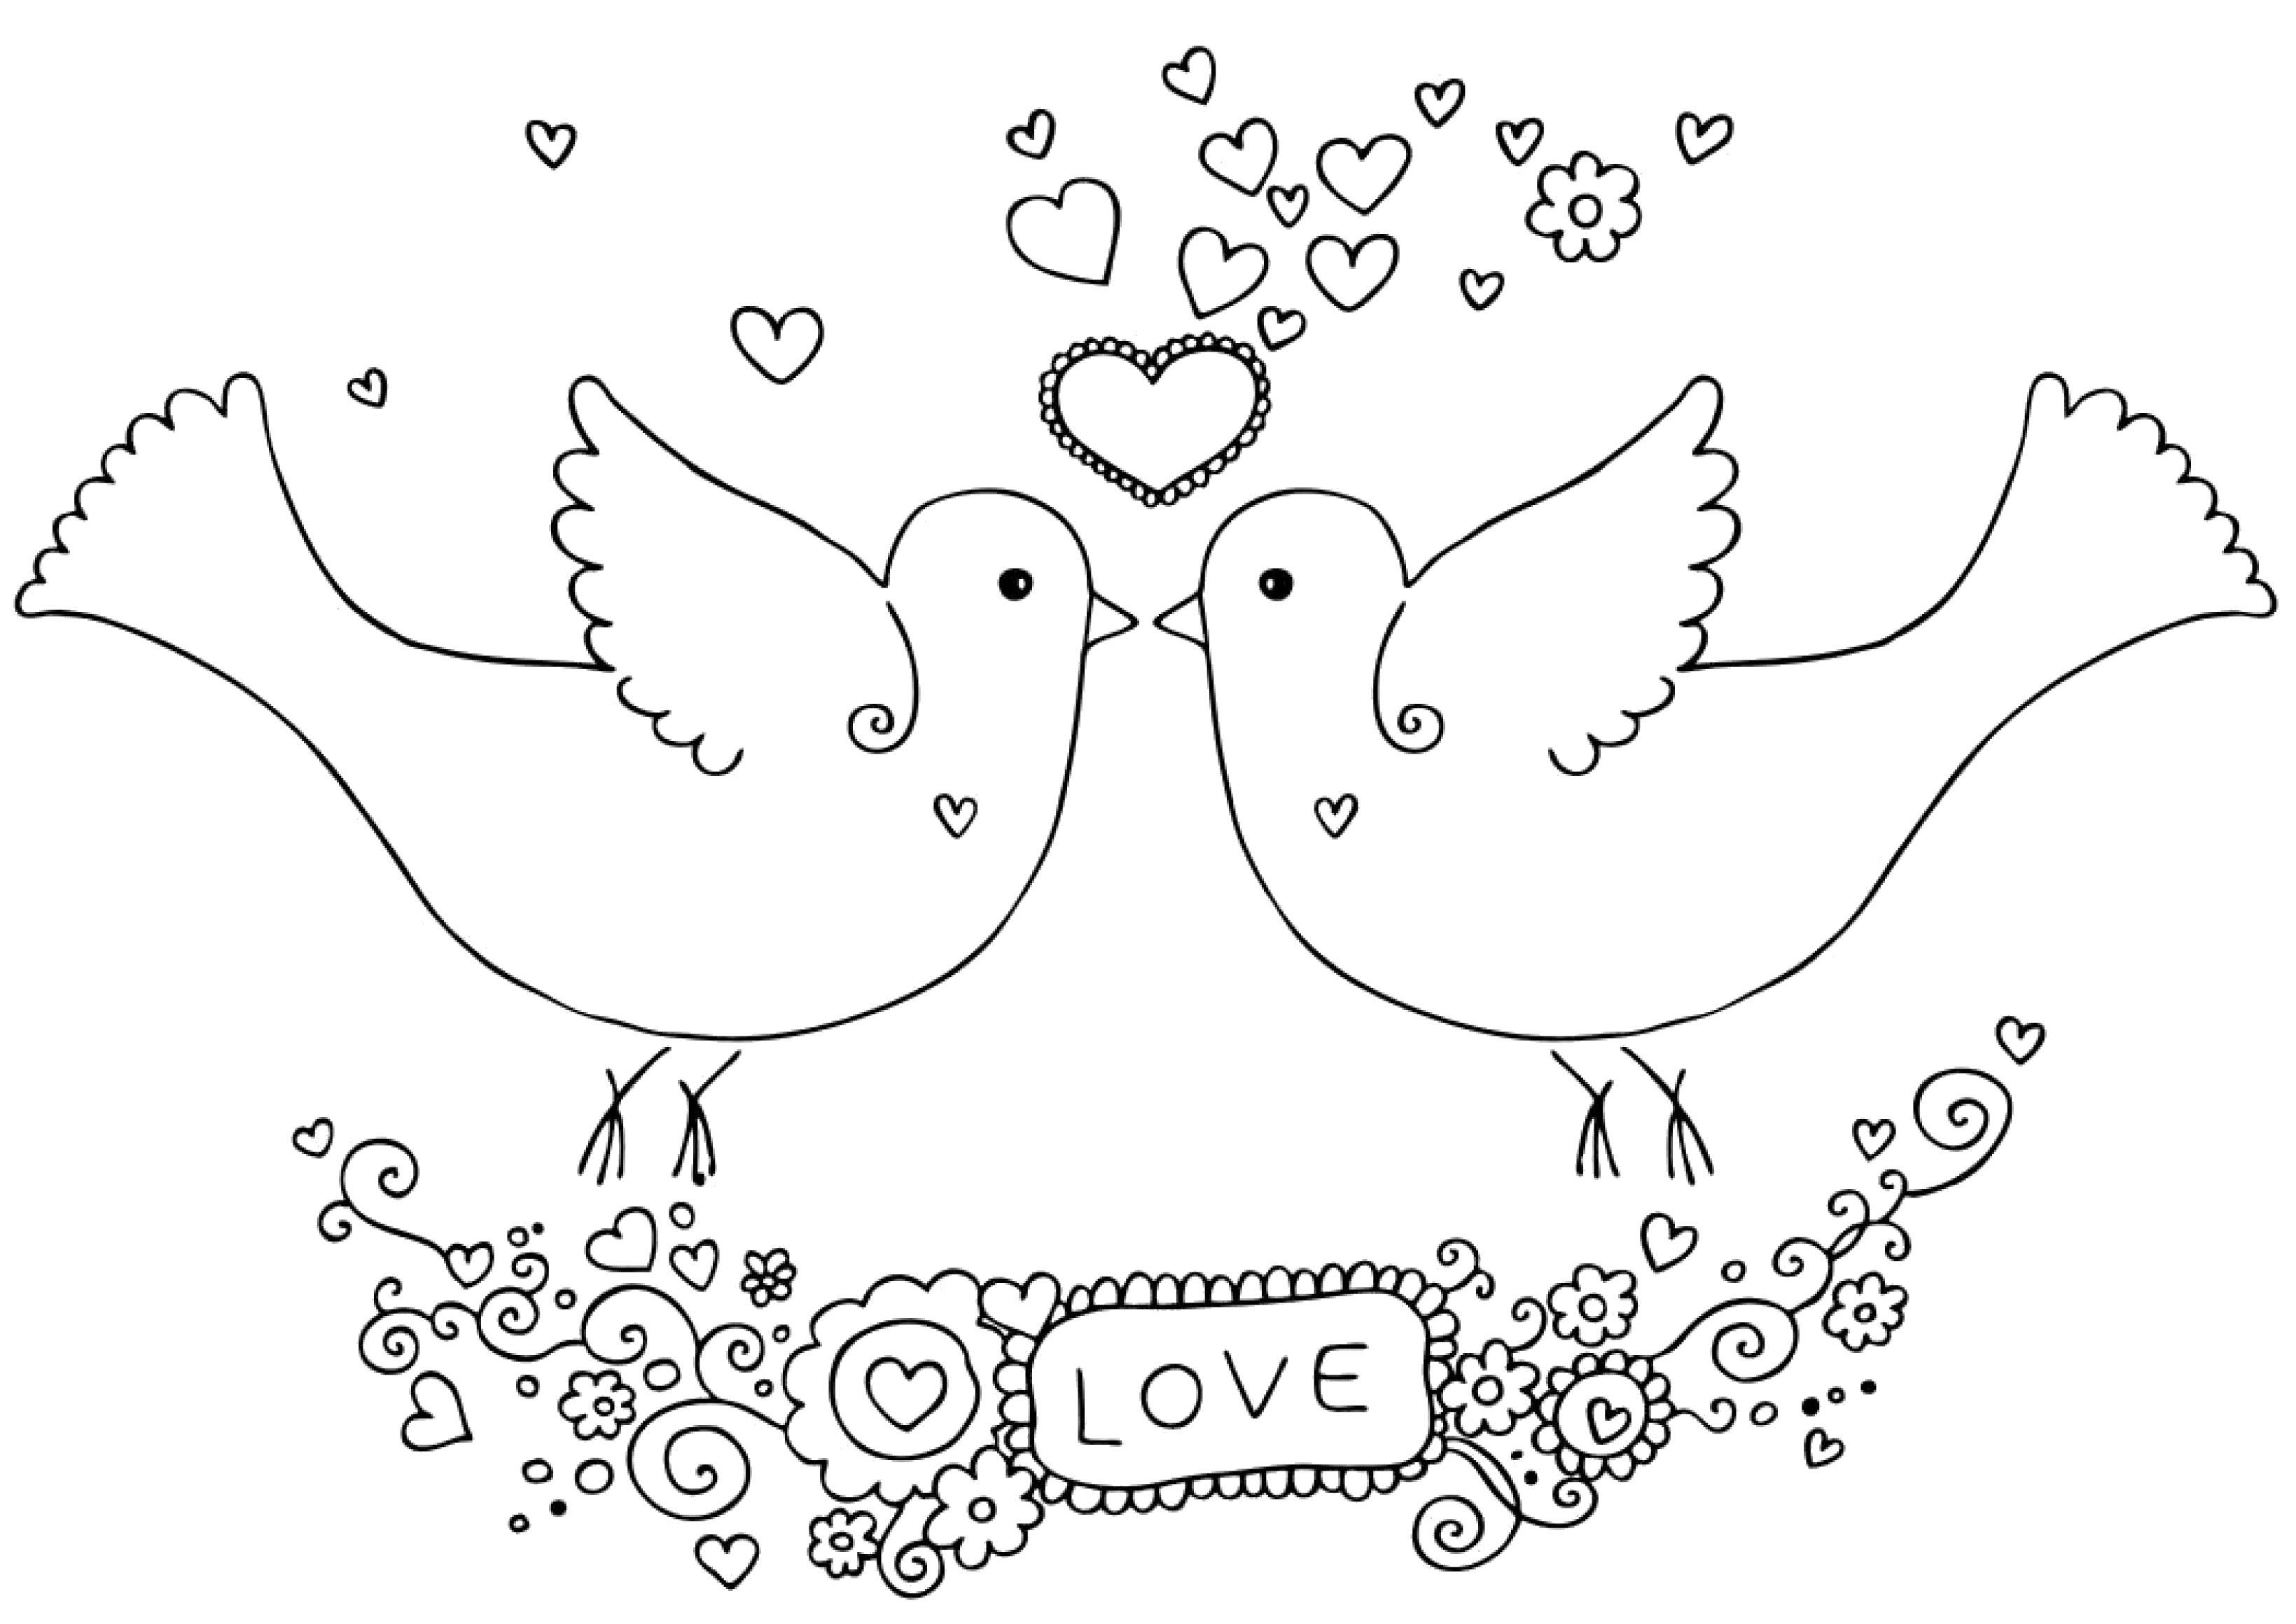 Coloring Love birds. Category Valentines day. Tags:  Valentines day, love, heart.